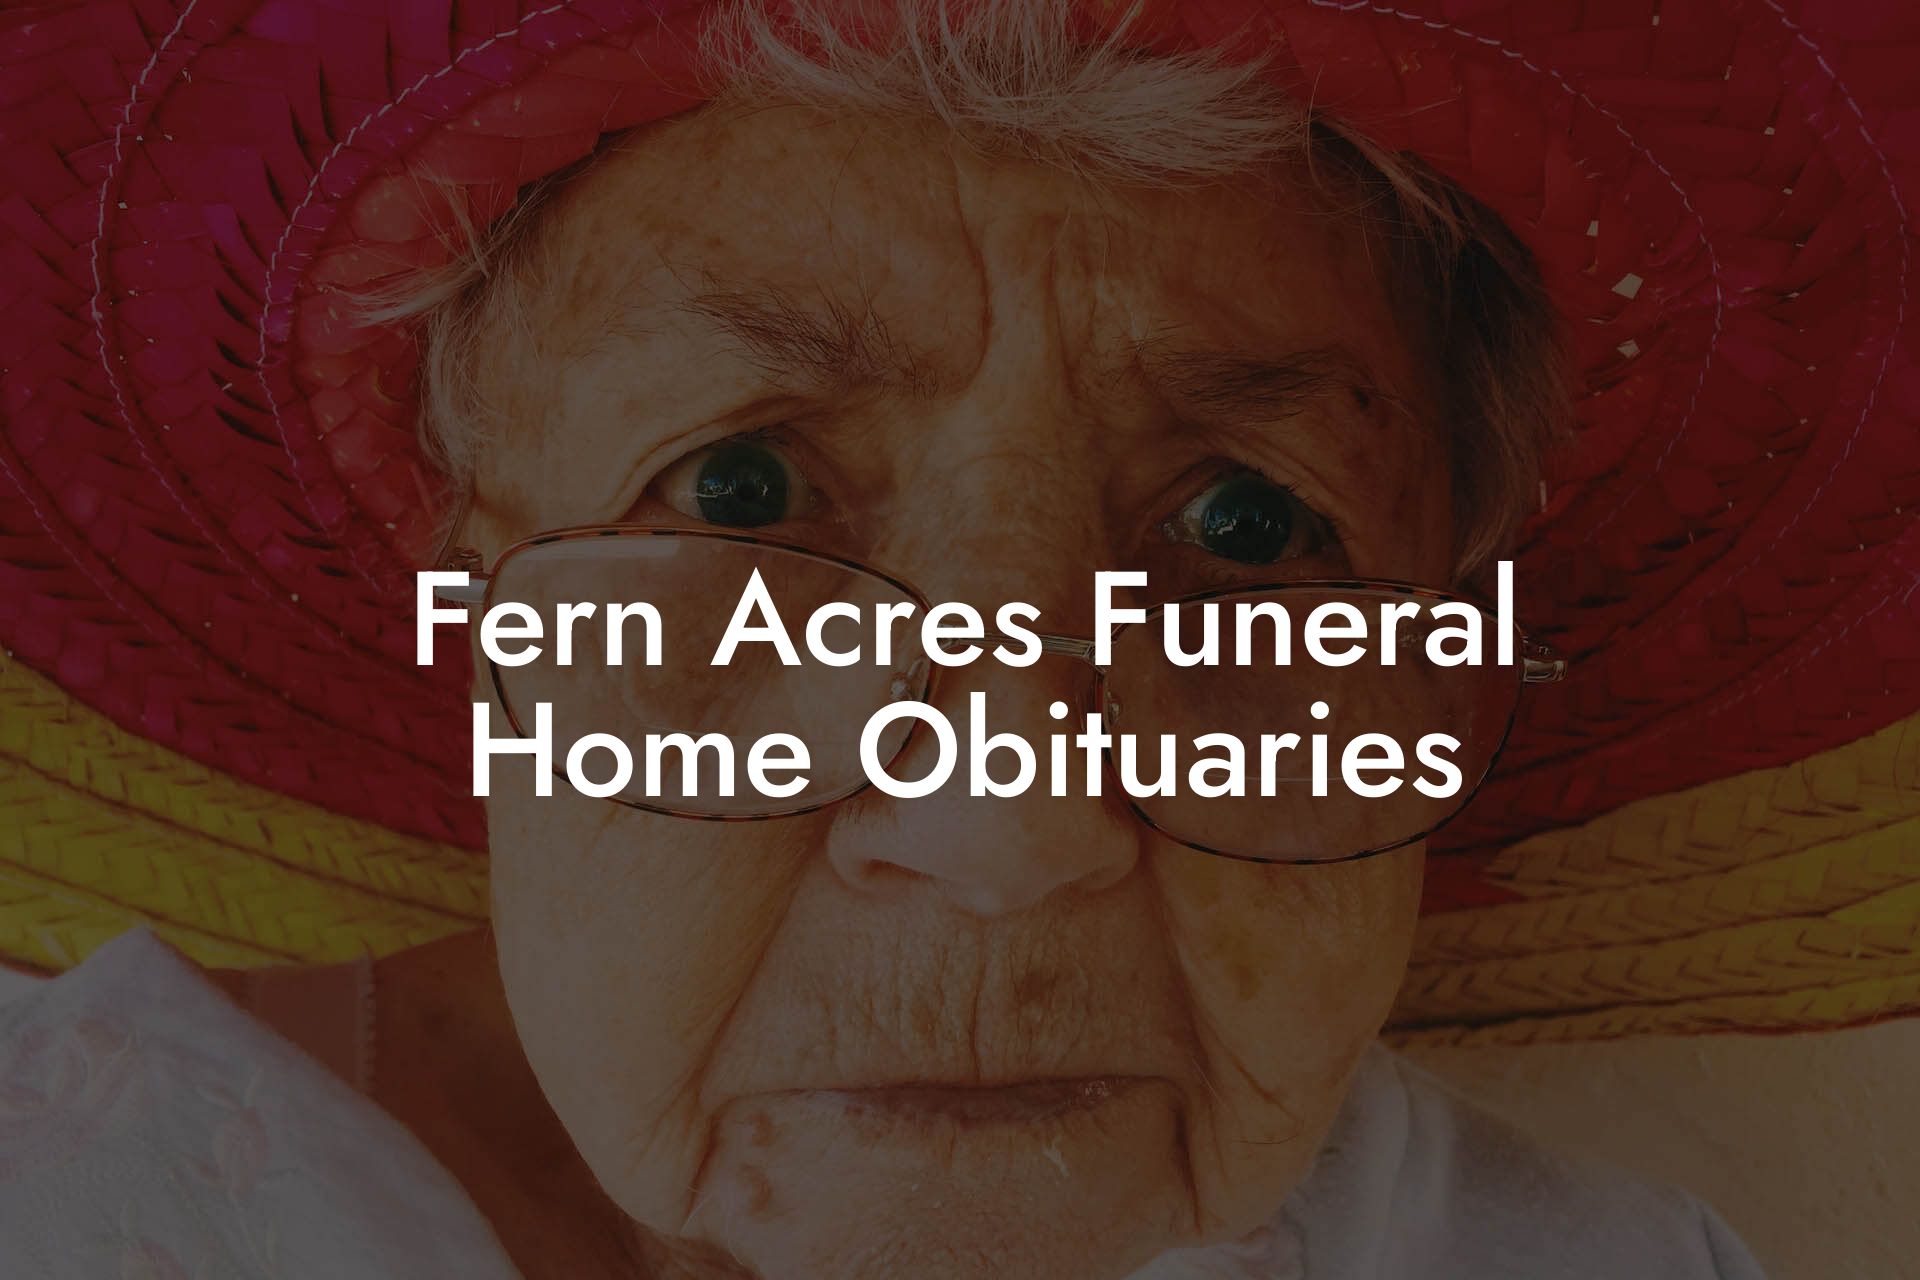 Fern Acres Funeral Home Obituaries